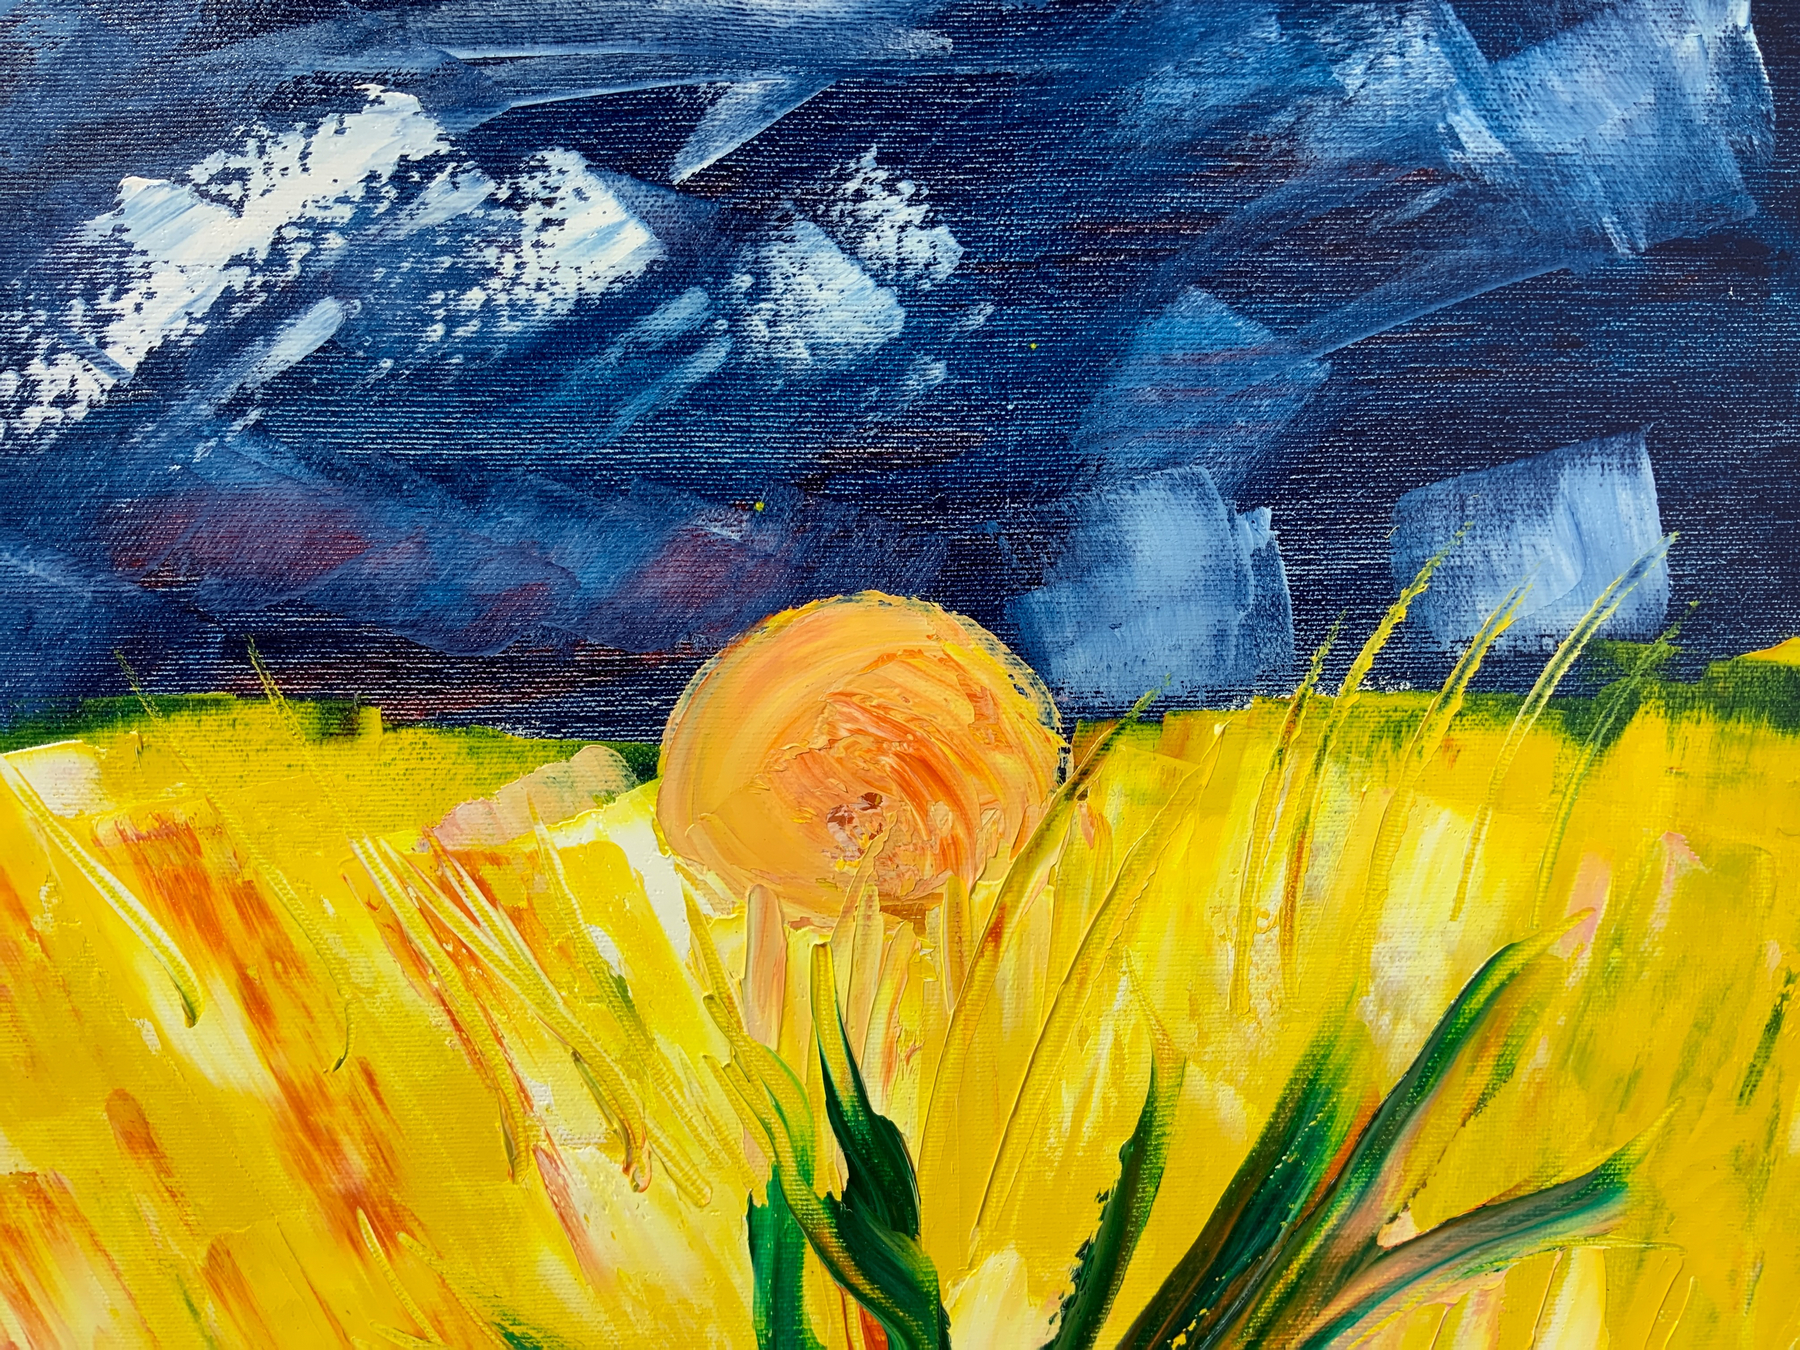 Oil painting on canvas signed M. Marino, depicting agave and wheat field. Cm 60x50 - Image 3 of 5